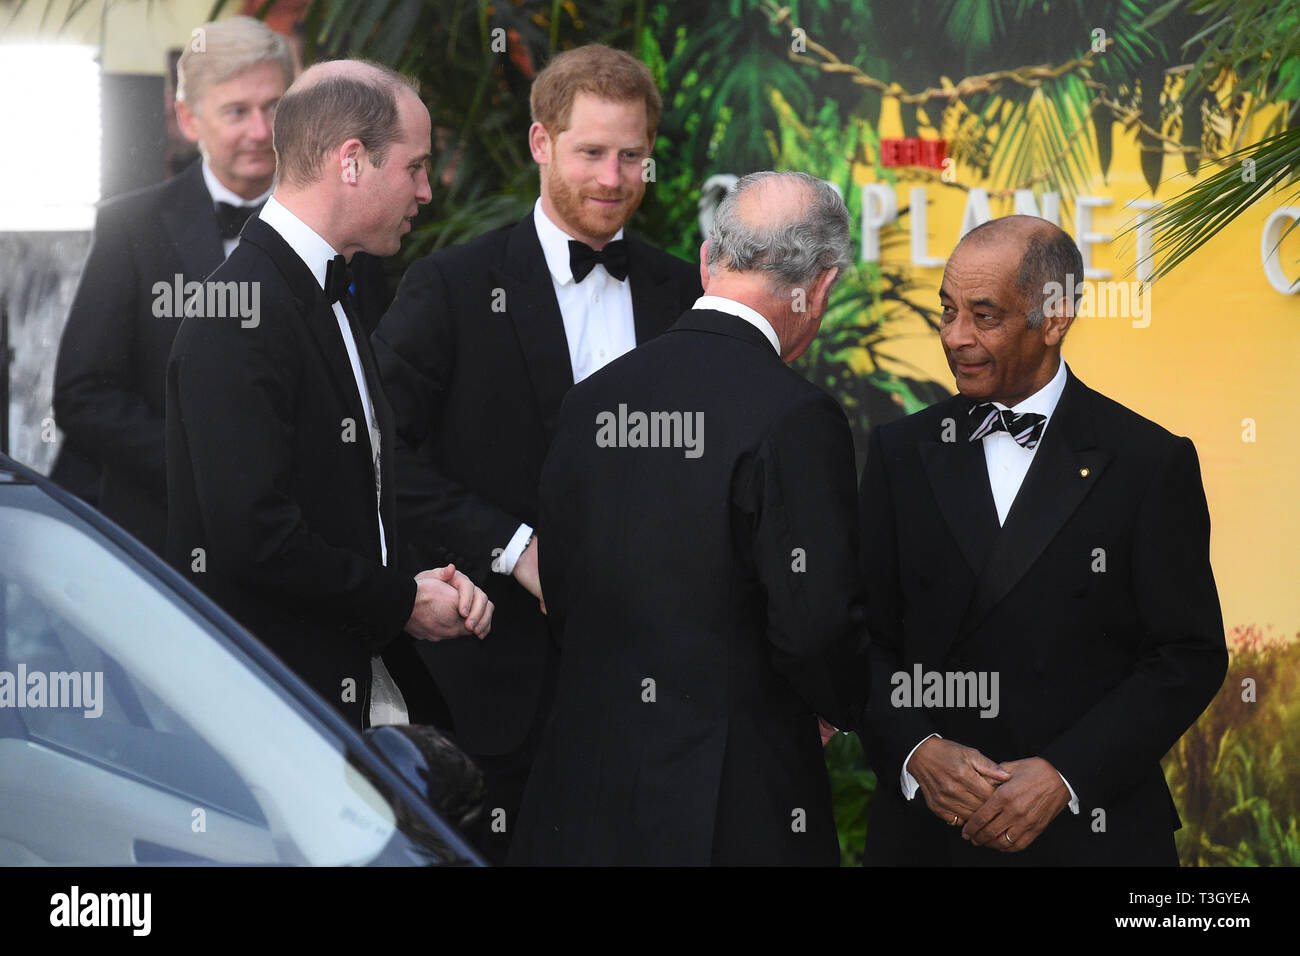 left-to-right-the-duke-of-cambridge-the-duke-of-sussex-the-prince-of-wales-and-the-lord-lieutenant-of-greater-london-sir-kenneth-olisa-arrive-to-attend-the-global-premiere-of-netflixs-our-planet-at-the-natural-history-museum-in-kensington-london-T3GYEA.jpg